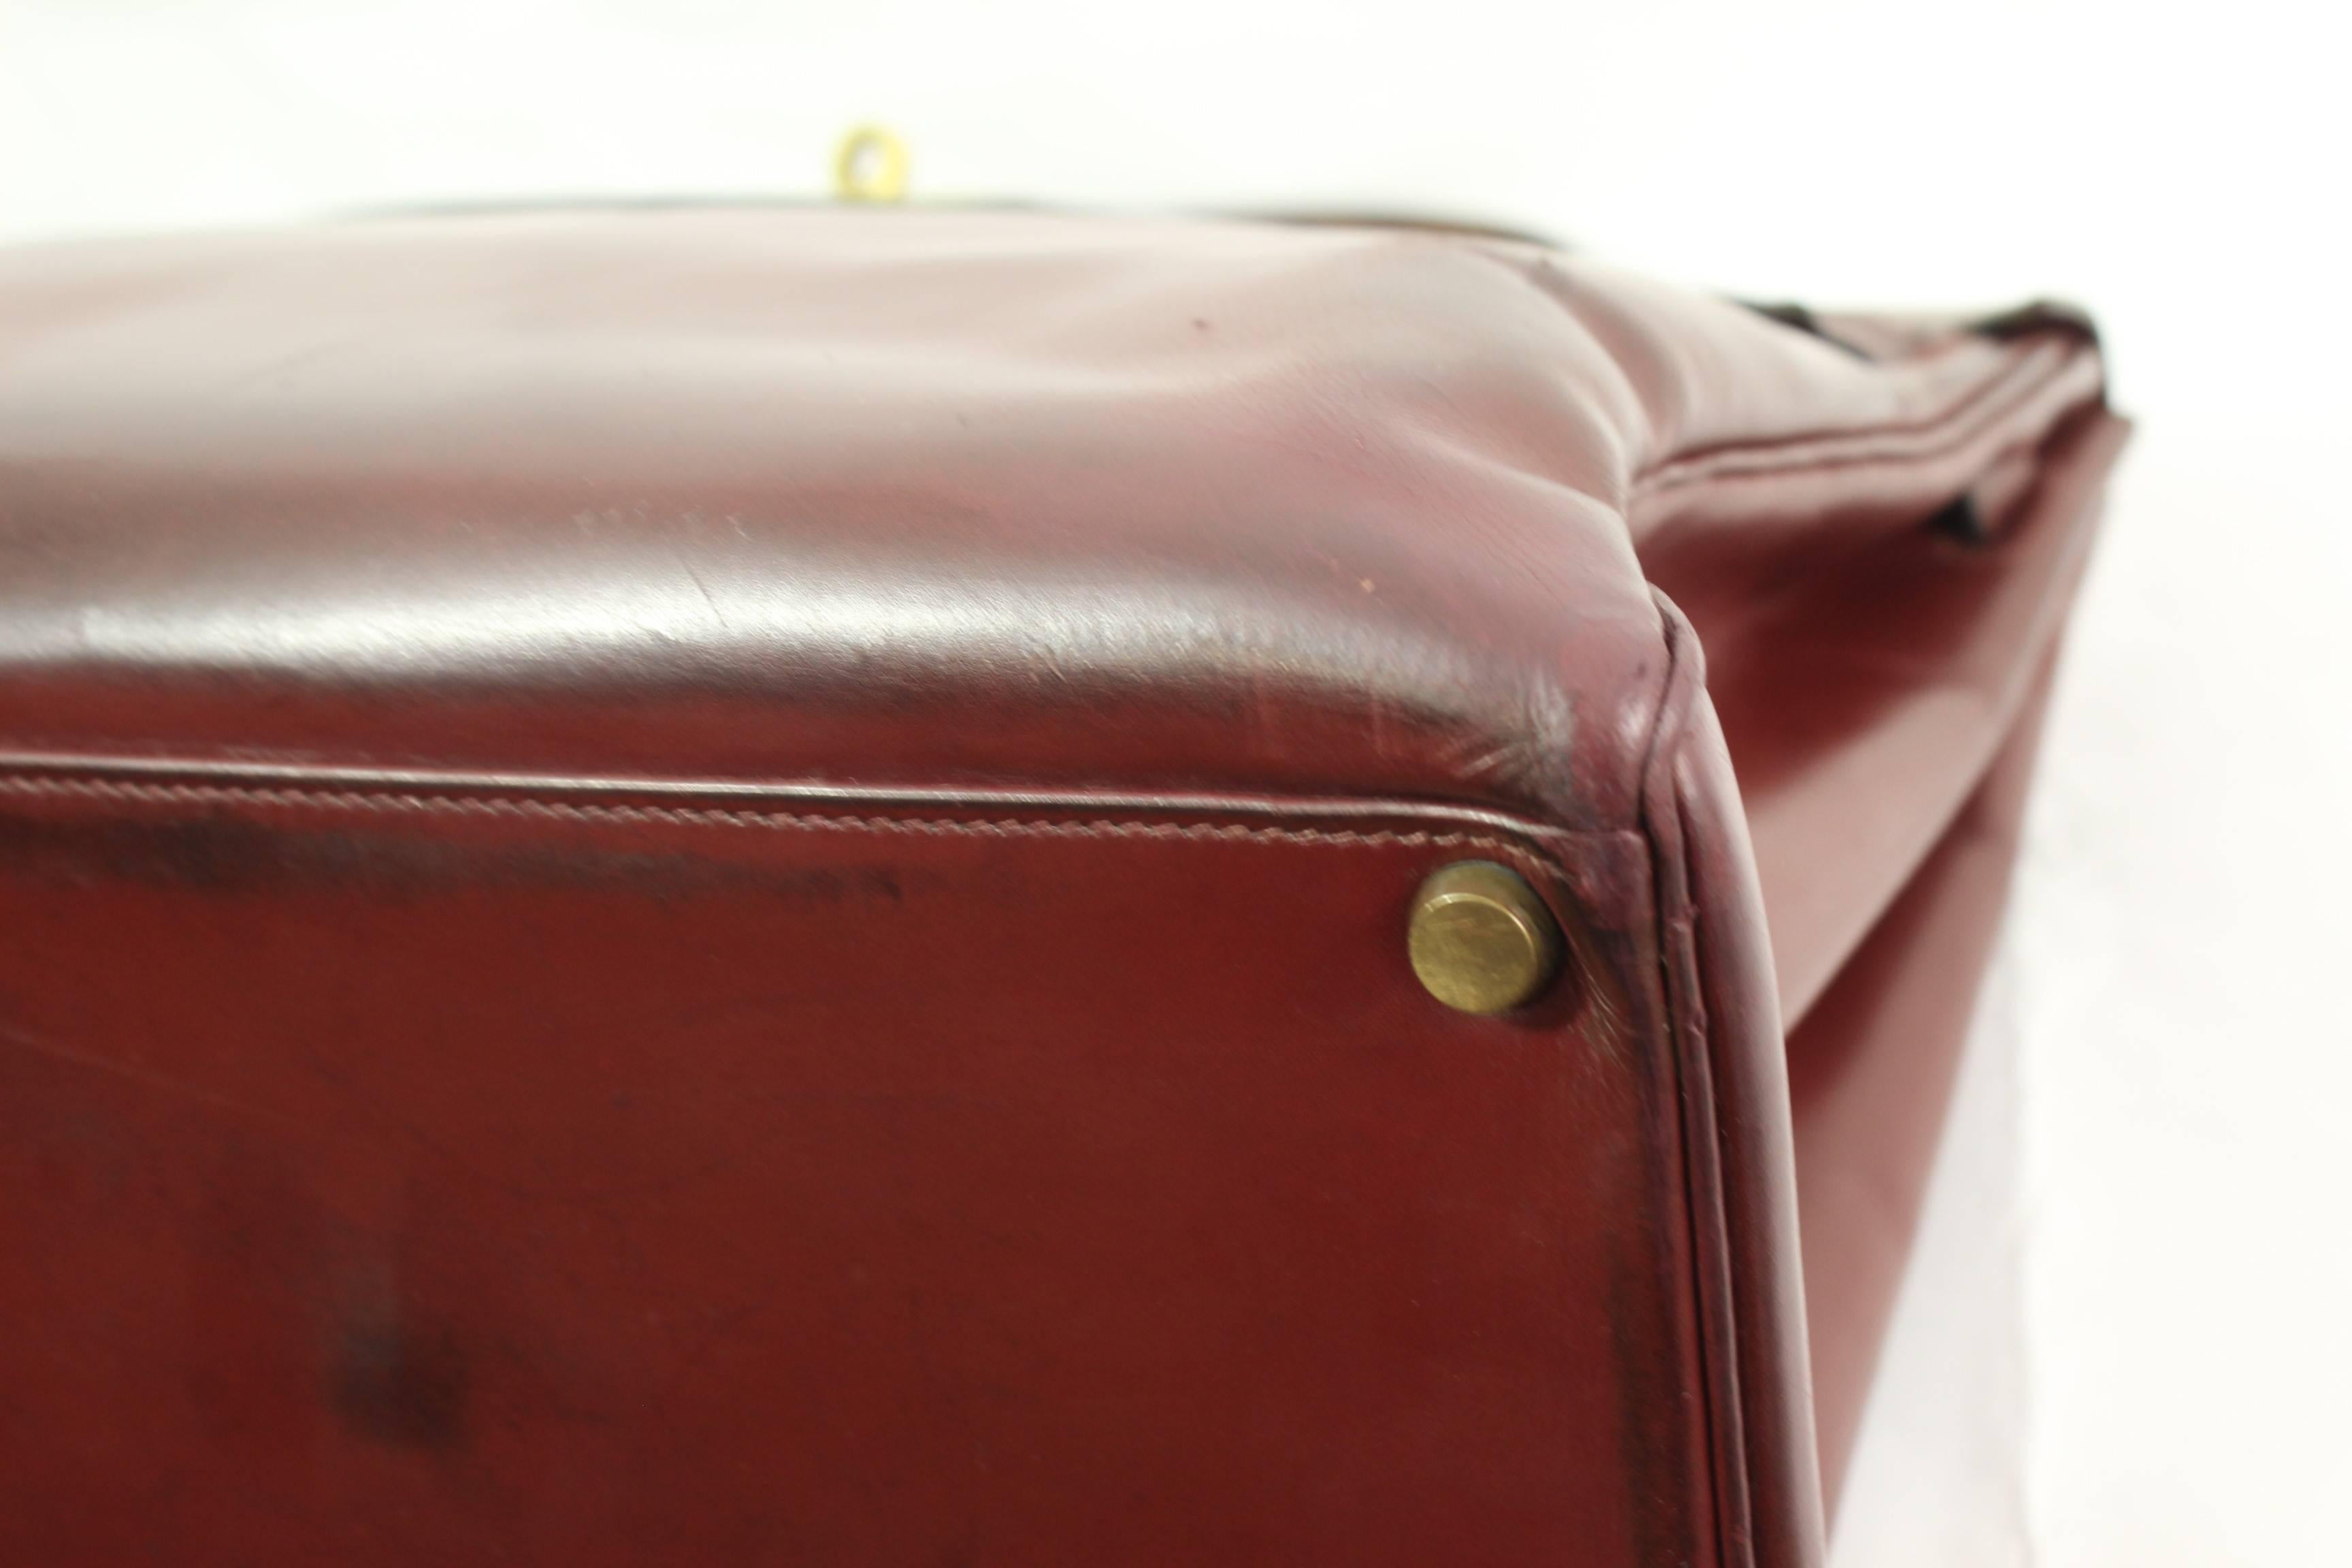 Vintage Hermes 35 bag in burgundy box leather.

Condition: good vintage condition for an item from the 60's. Light cracking on the leather 
Some shade sin the leather.

Signs of use in the handle ( check images)

Sold without padlock

Clean